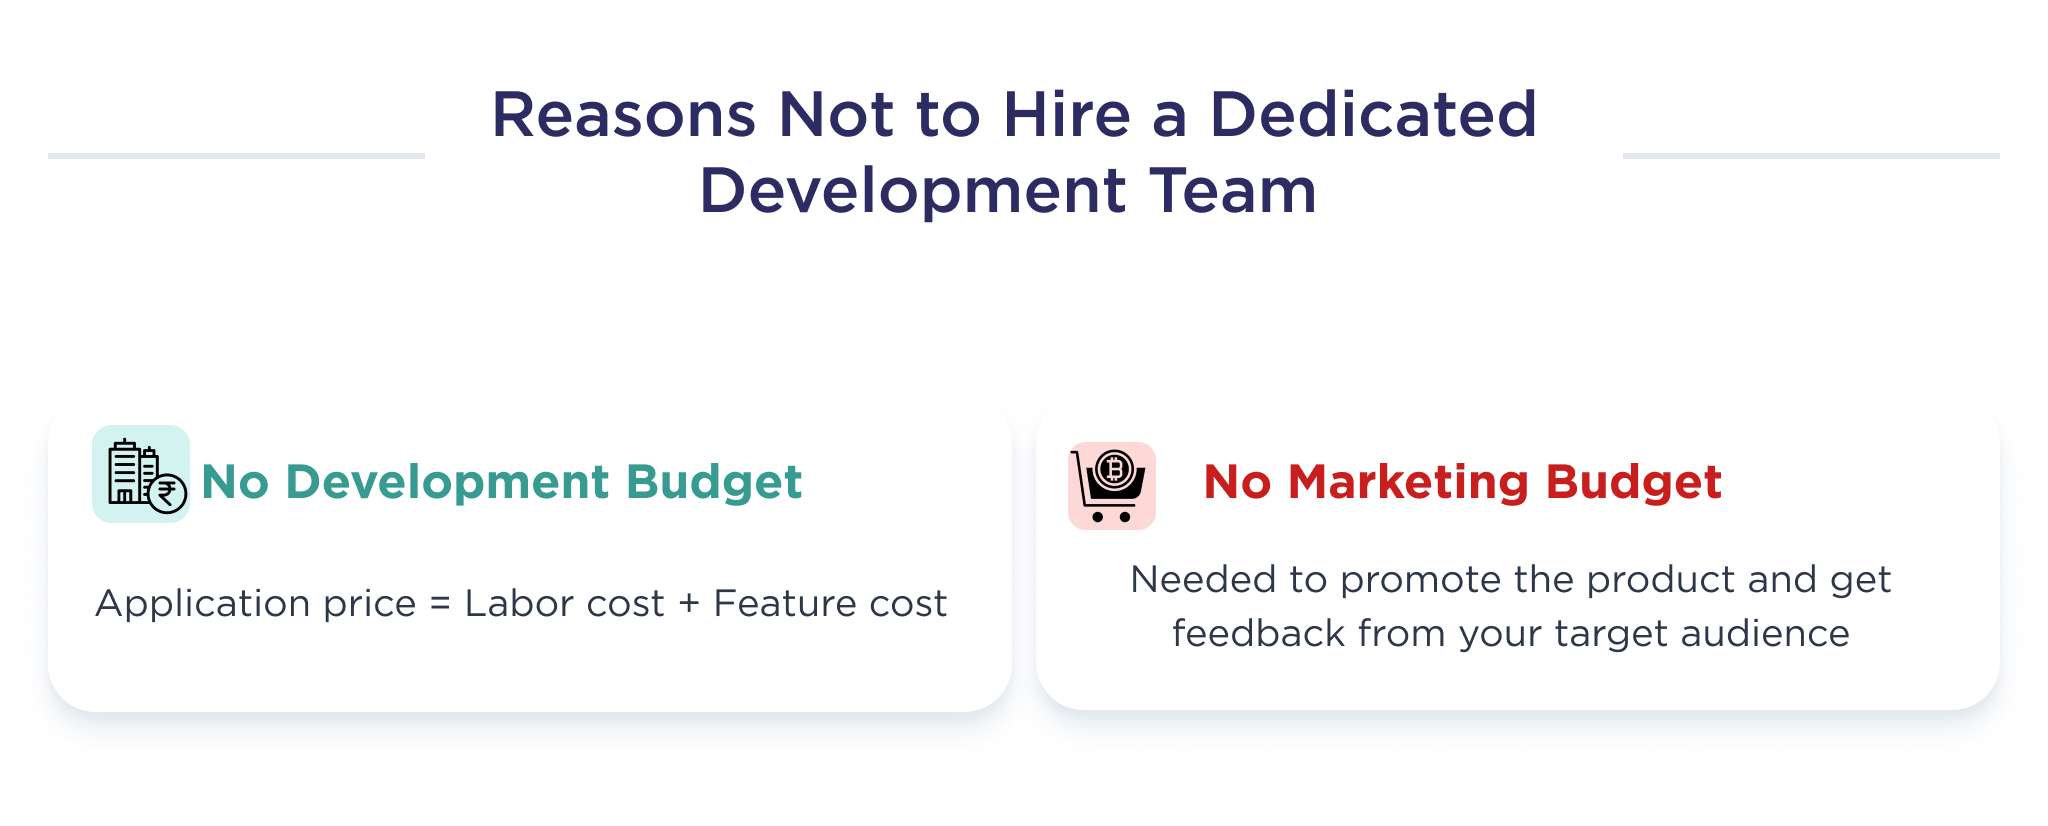 The illustration shows the main reasons not to hire a dedicated development team